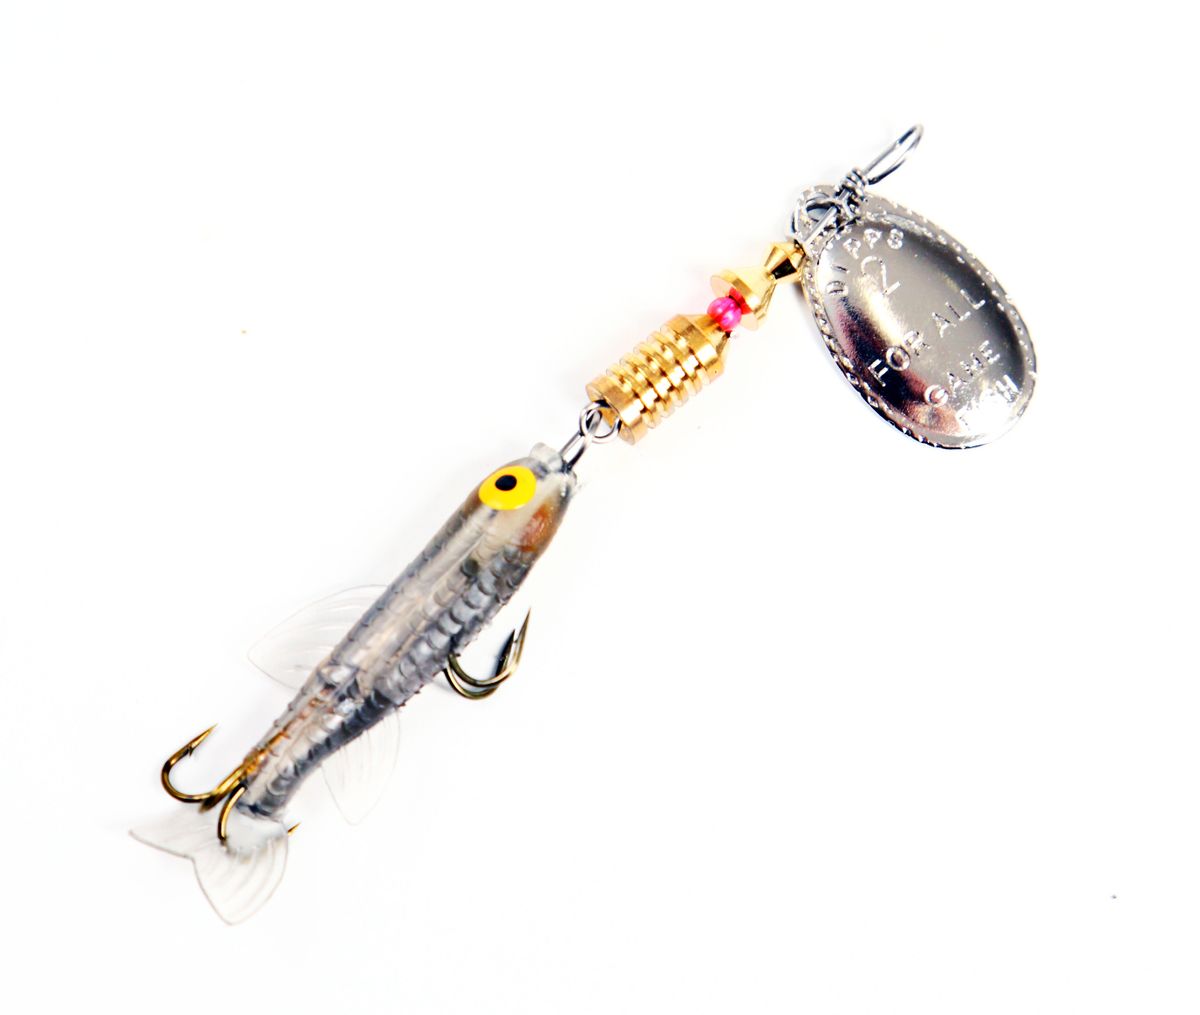 FishX 4-Piece Freshwater / Saltwater Fishing Lure Spinner Pack